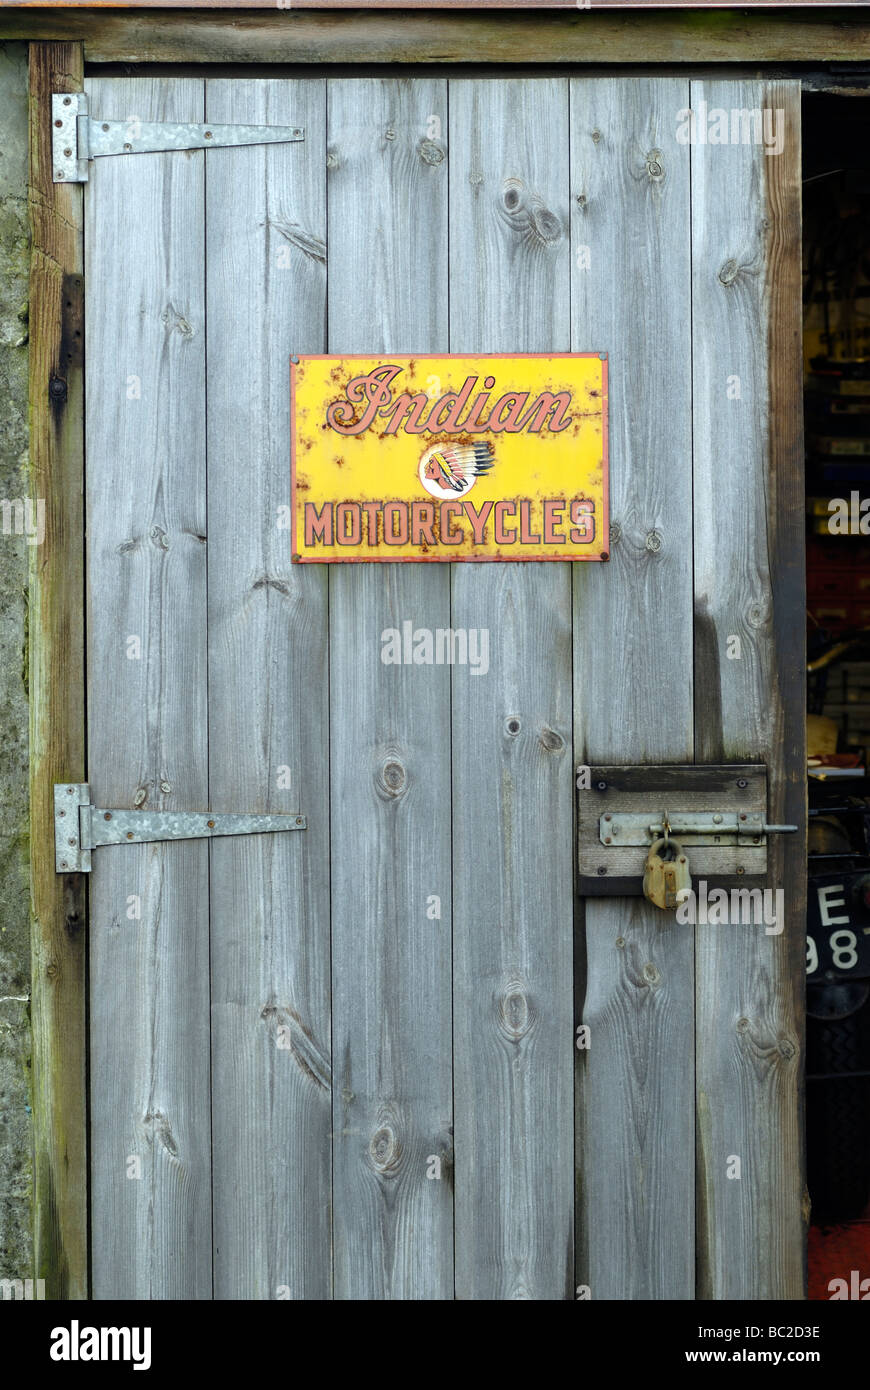 Old Indian motorcycle enamel sign on an old wooden garage door Stock Photo